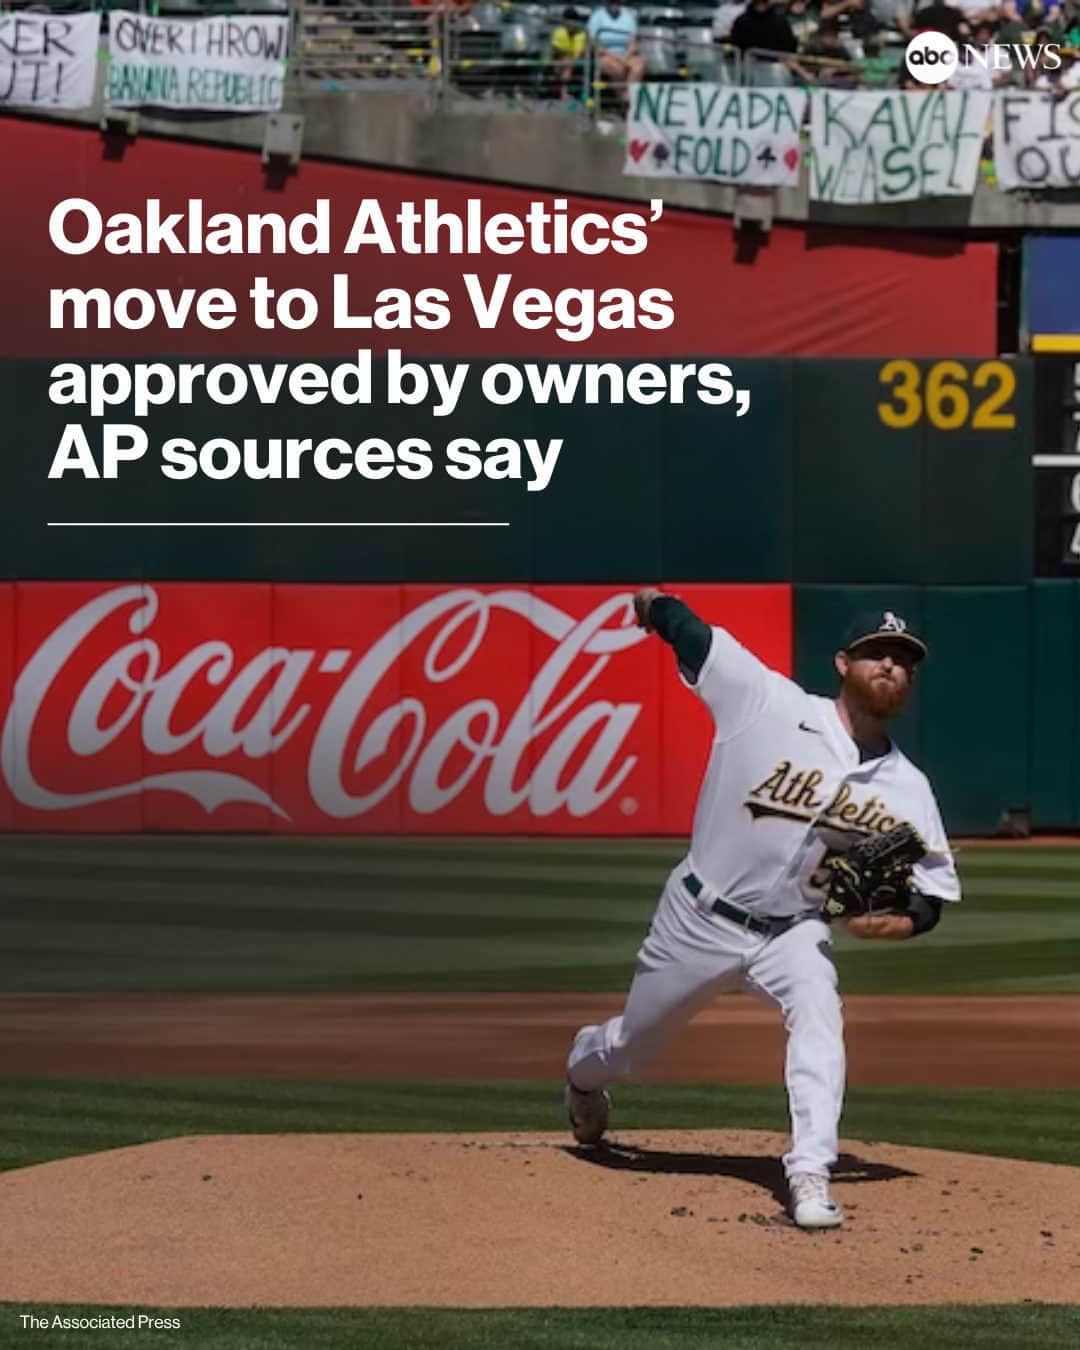 ABC Newsのインスタグラム：「The Oakland Athletics' move to Las Vegas has been unanimously approved by their Major League Baseball owners, sources of The Associated Press confirm.  After years of complaints about the Oakland Coliseum and an inability to gain government assistance for a new ballpark in the Bay area, the A’s plan to move to a new stadium — to be built on the Las Vegas Strip with $380 million in public financing —  was approved by the Nevada government.   The A’s lease at the Coliseum expires after the 2024 season and it remains unclear where the team will play before a new ballpark opens, in 2027 at the earliest. Read more at the link in bio.」